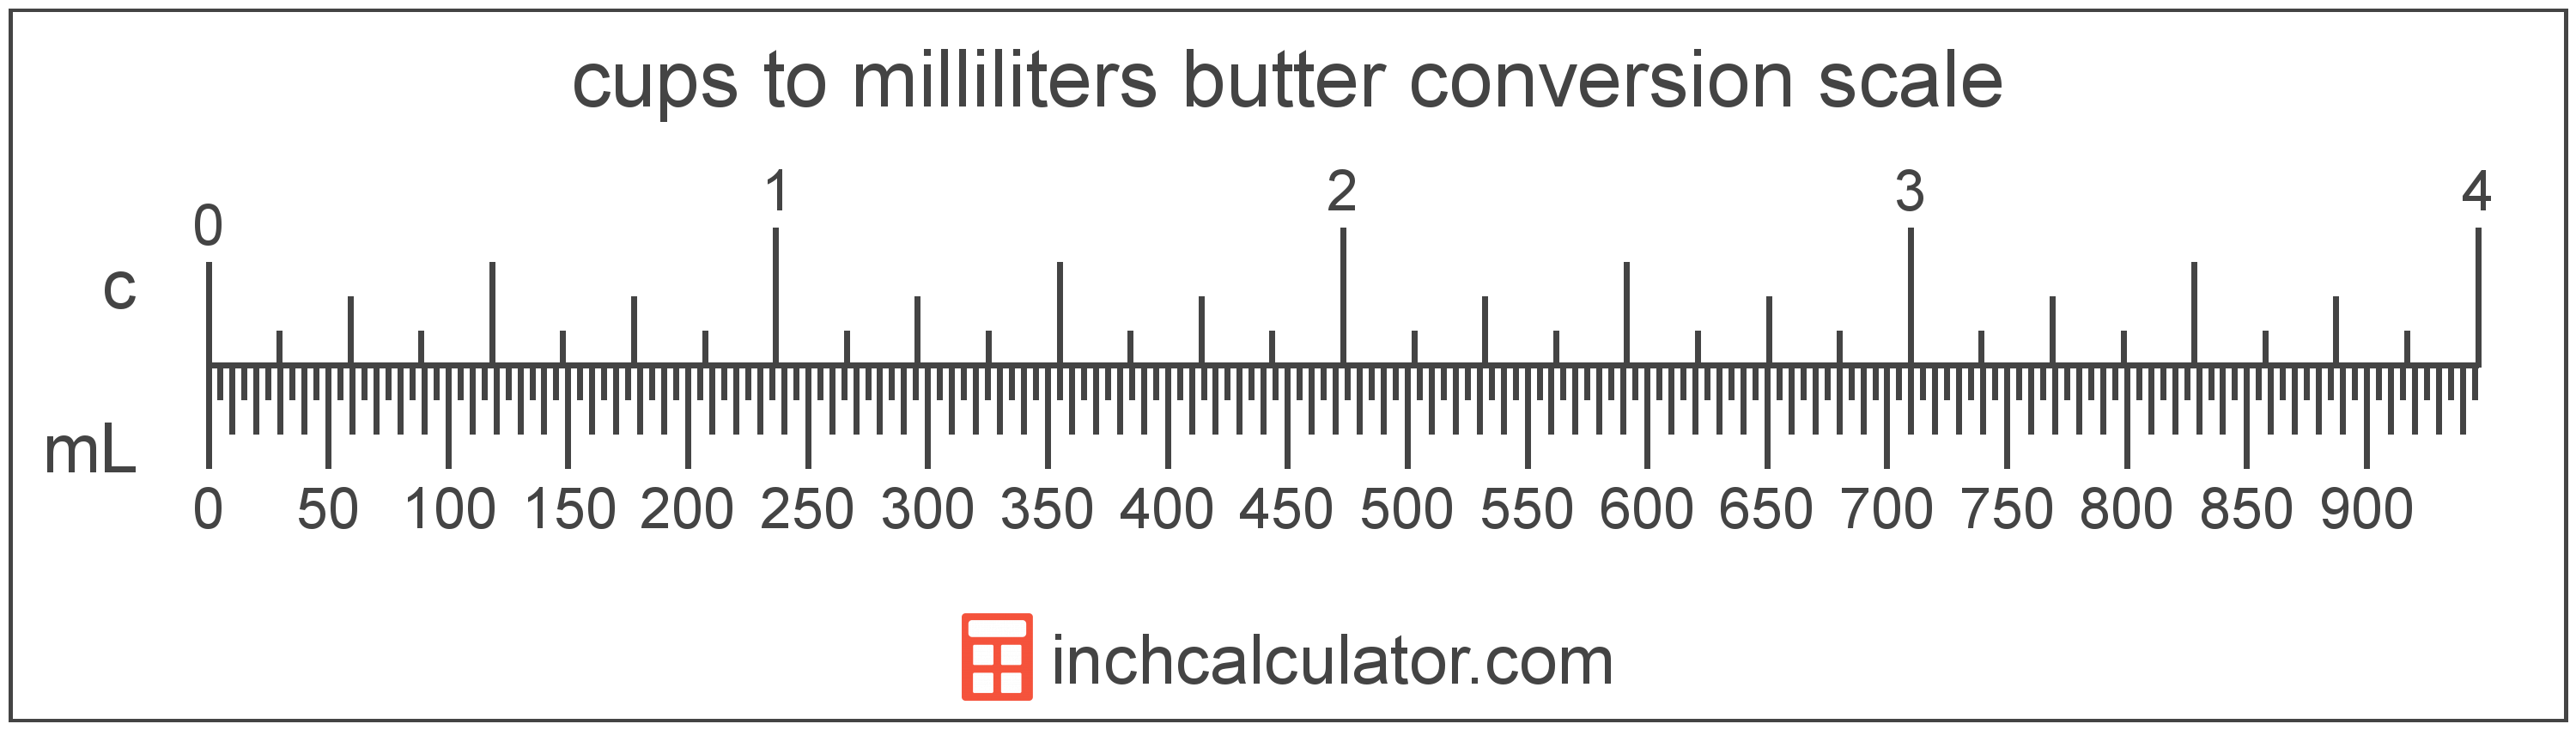 conversion scale showing milliliters and equivalent cups butter values